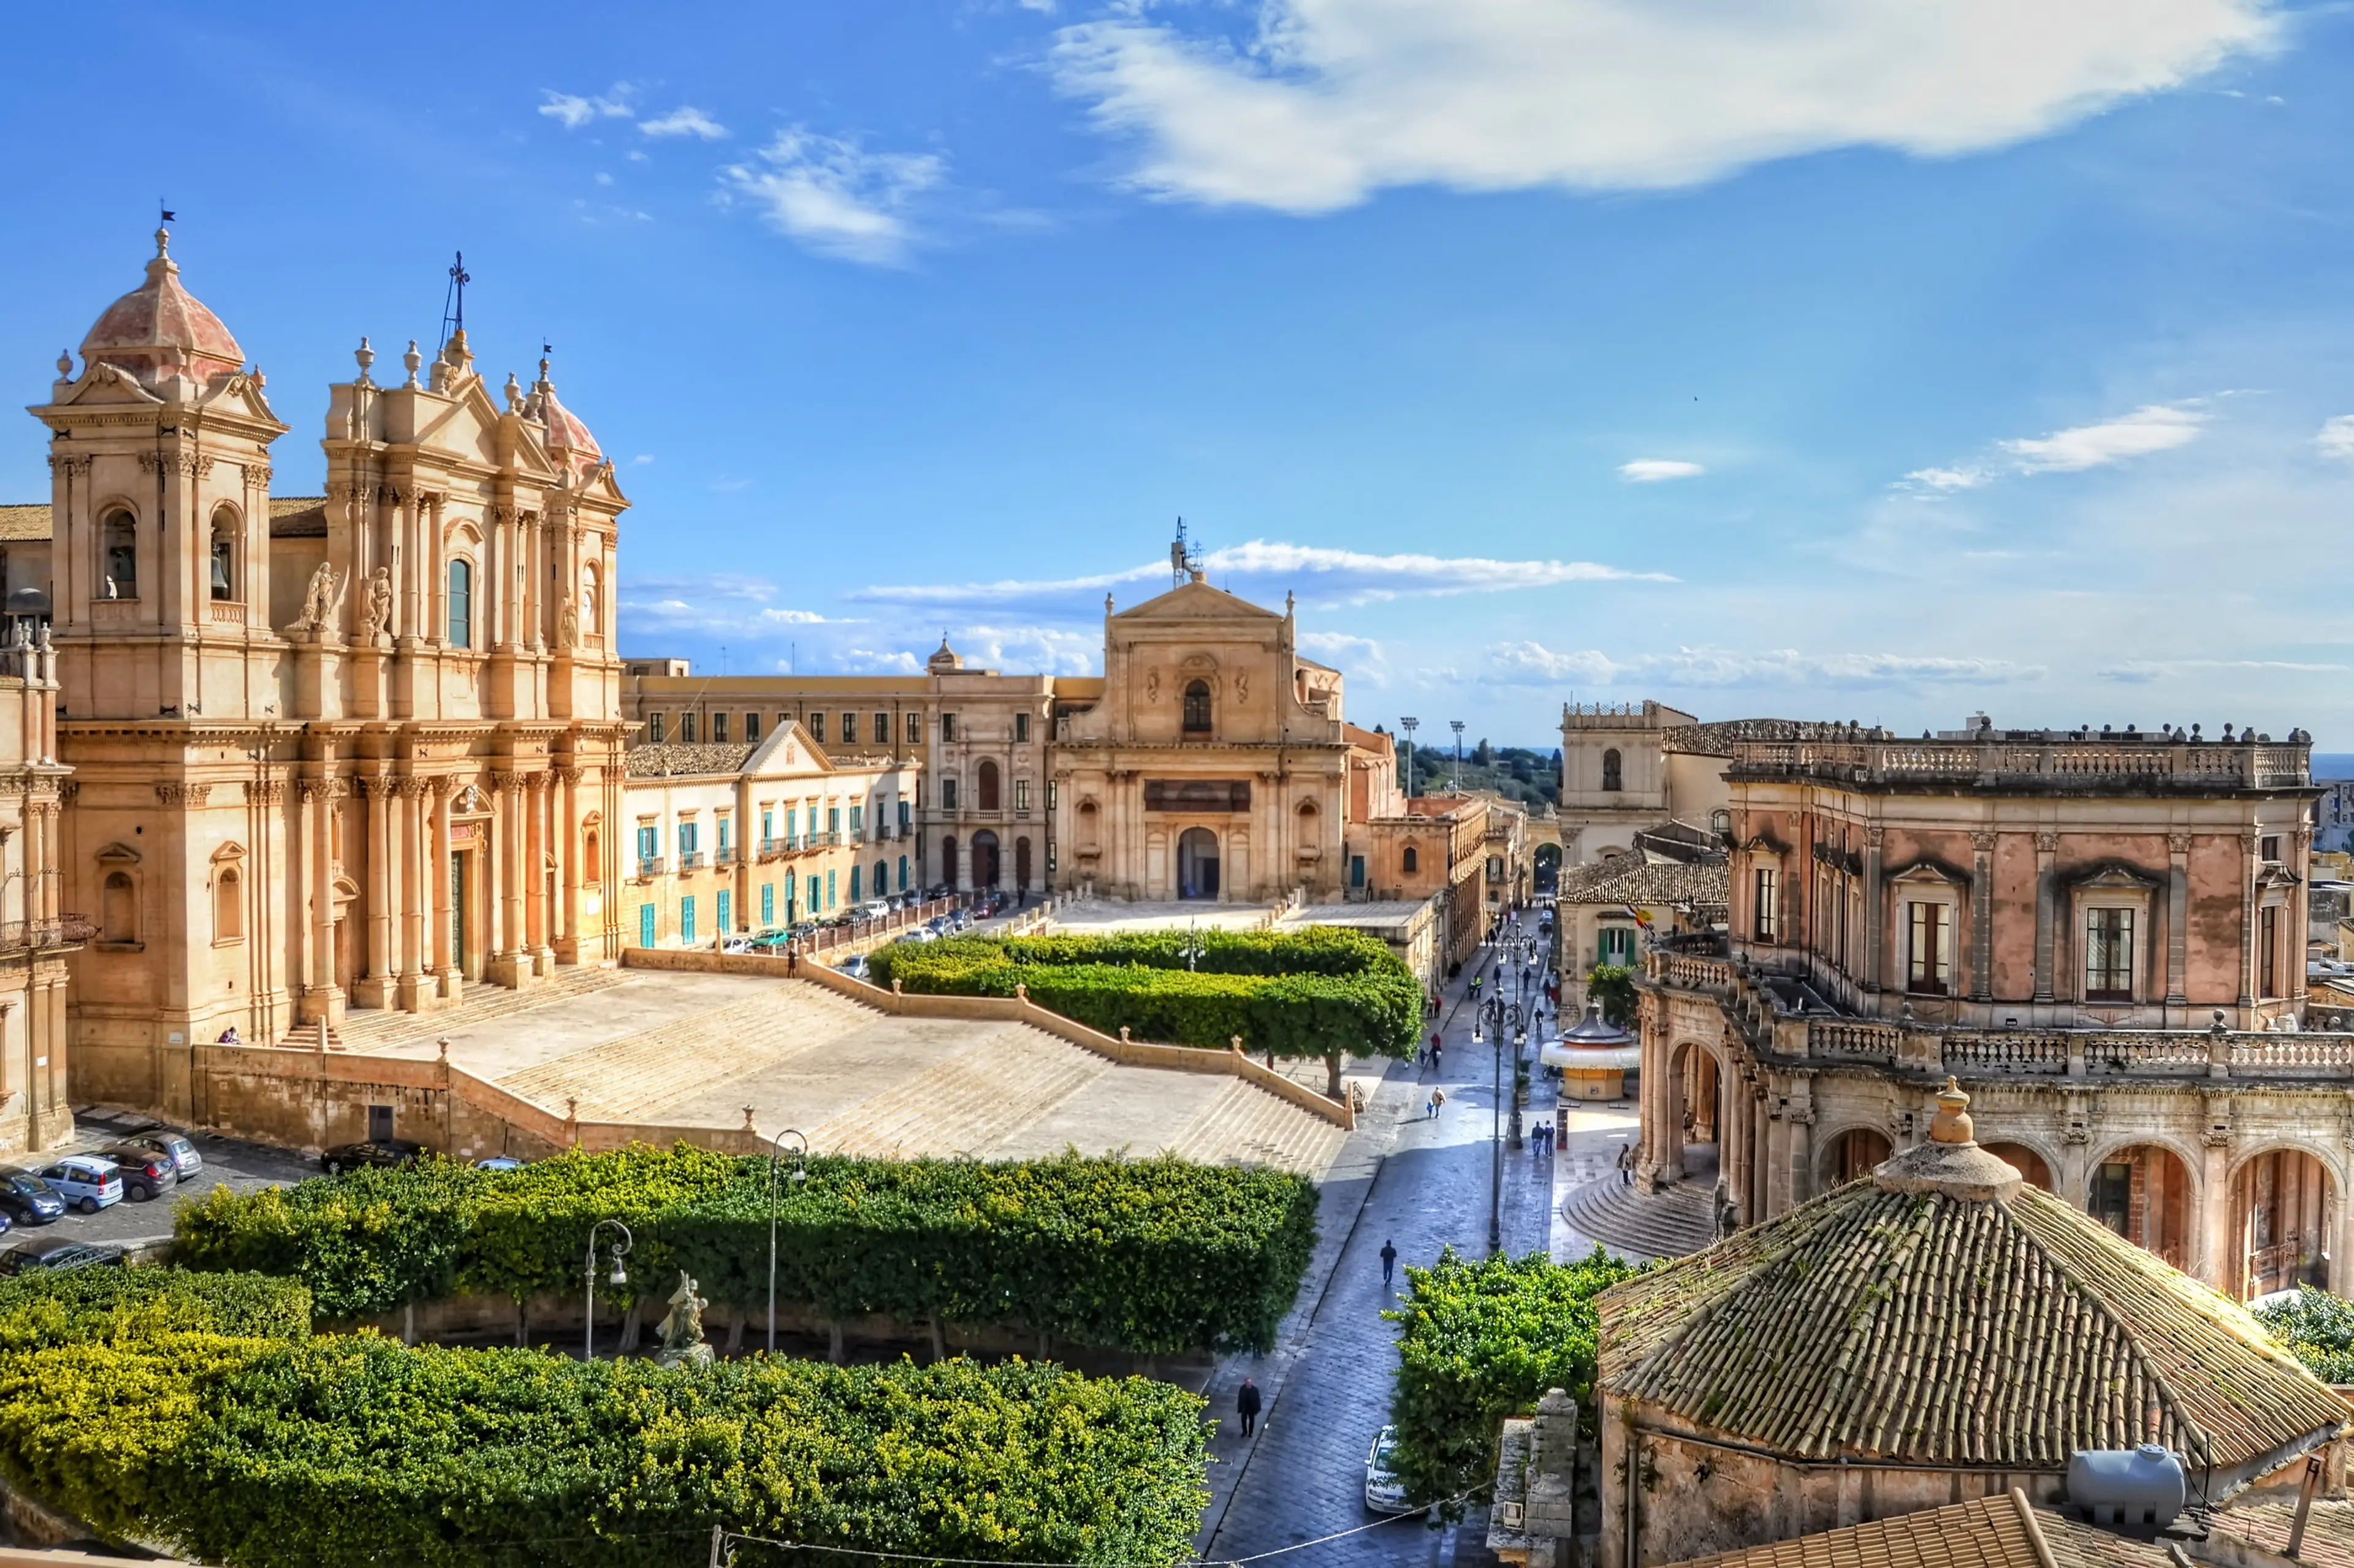 1-Day Adventure & Outdoor Exploration for Locals in Sicily